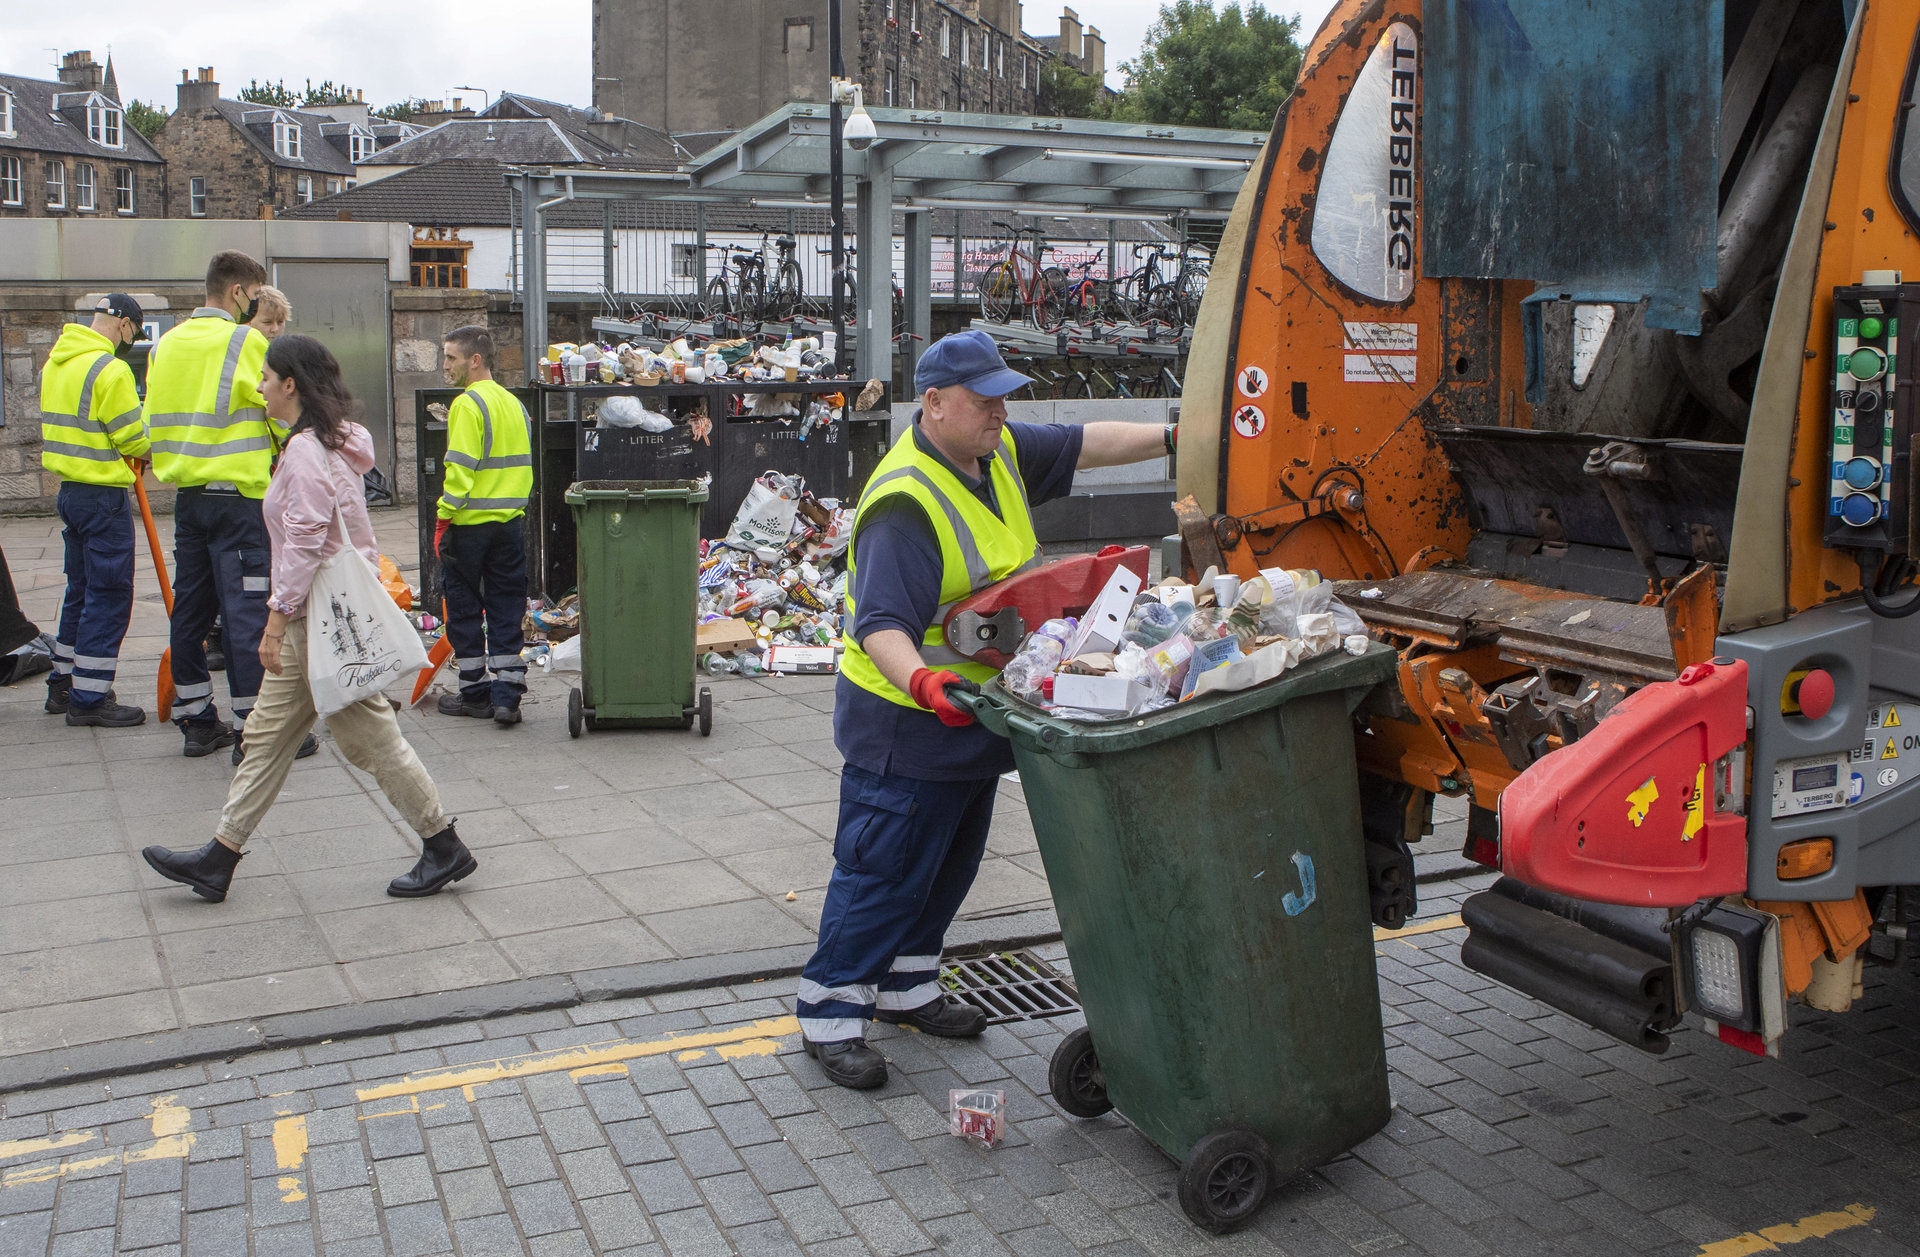 Bin workers begin to clean up overflowing bins and rubbish on Edinburgh's streets after the 12 day bin strike ends.